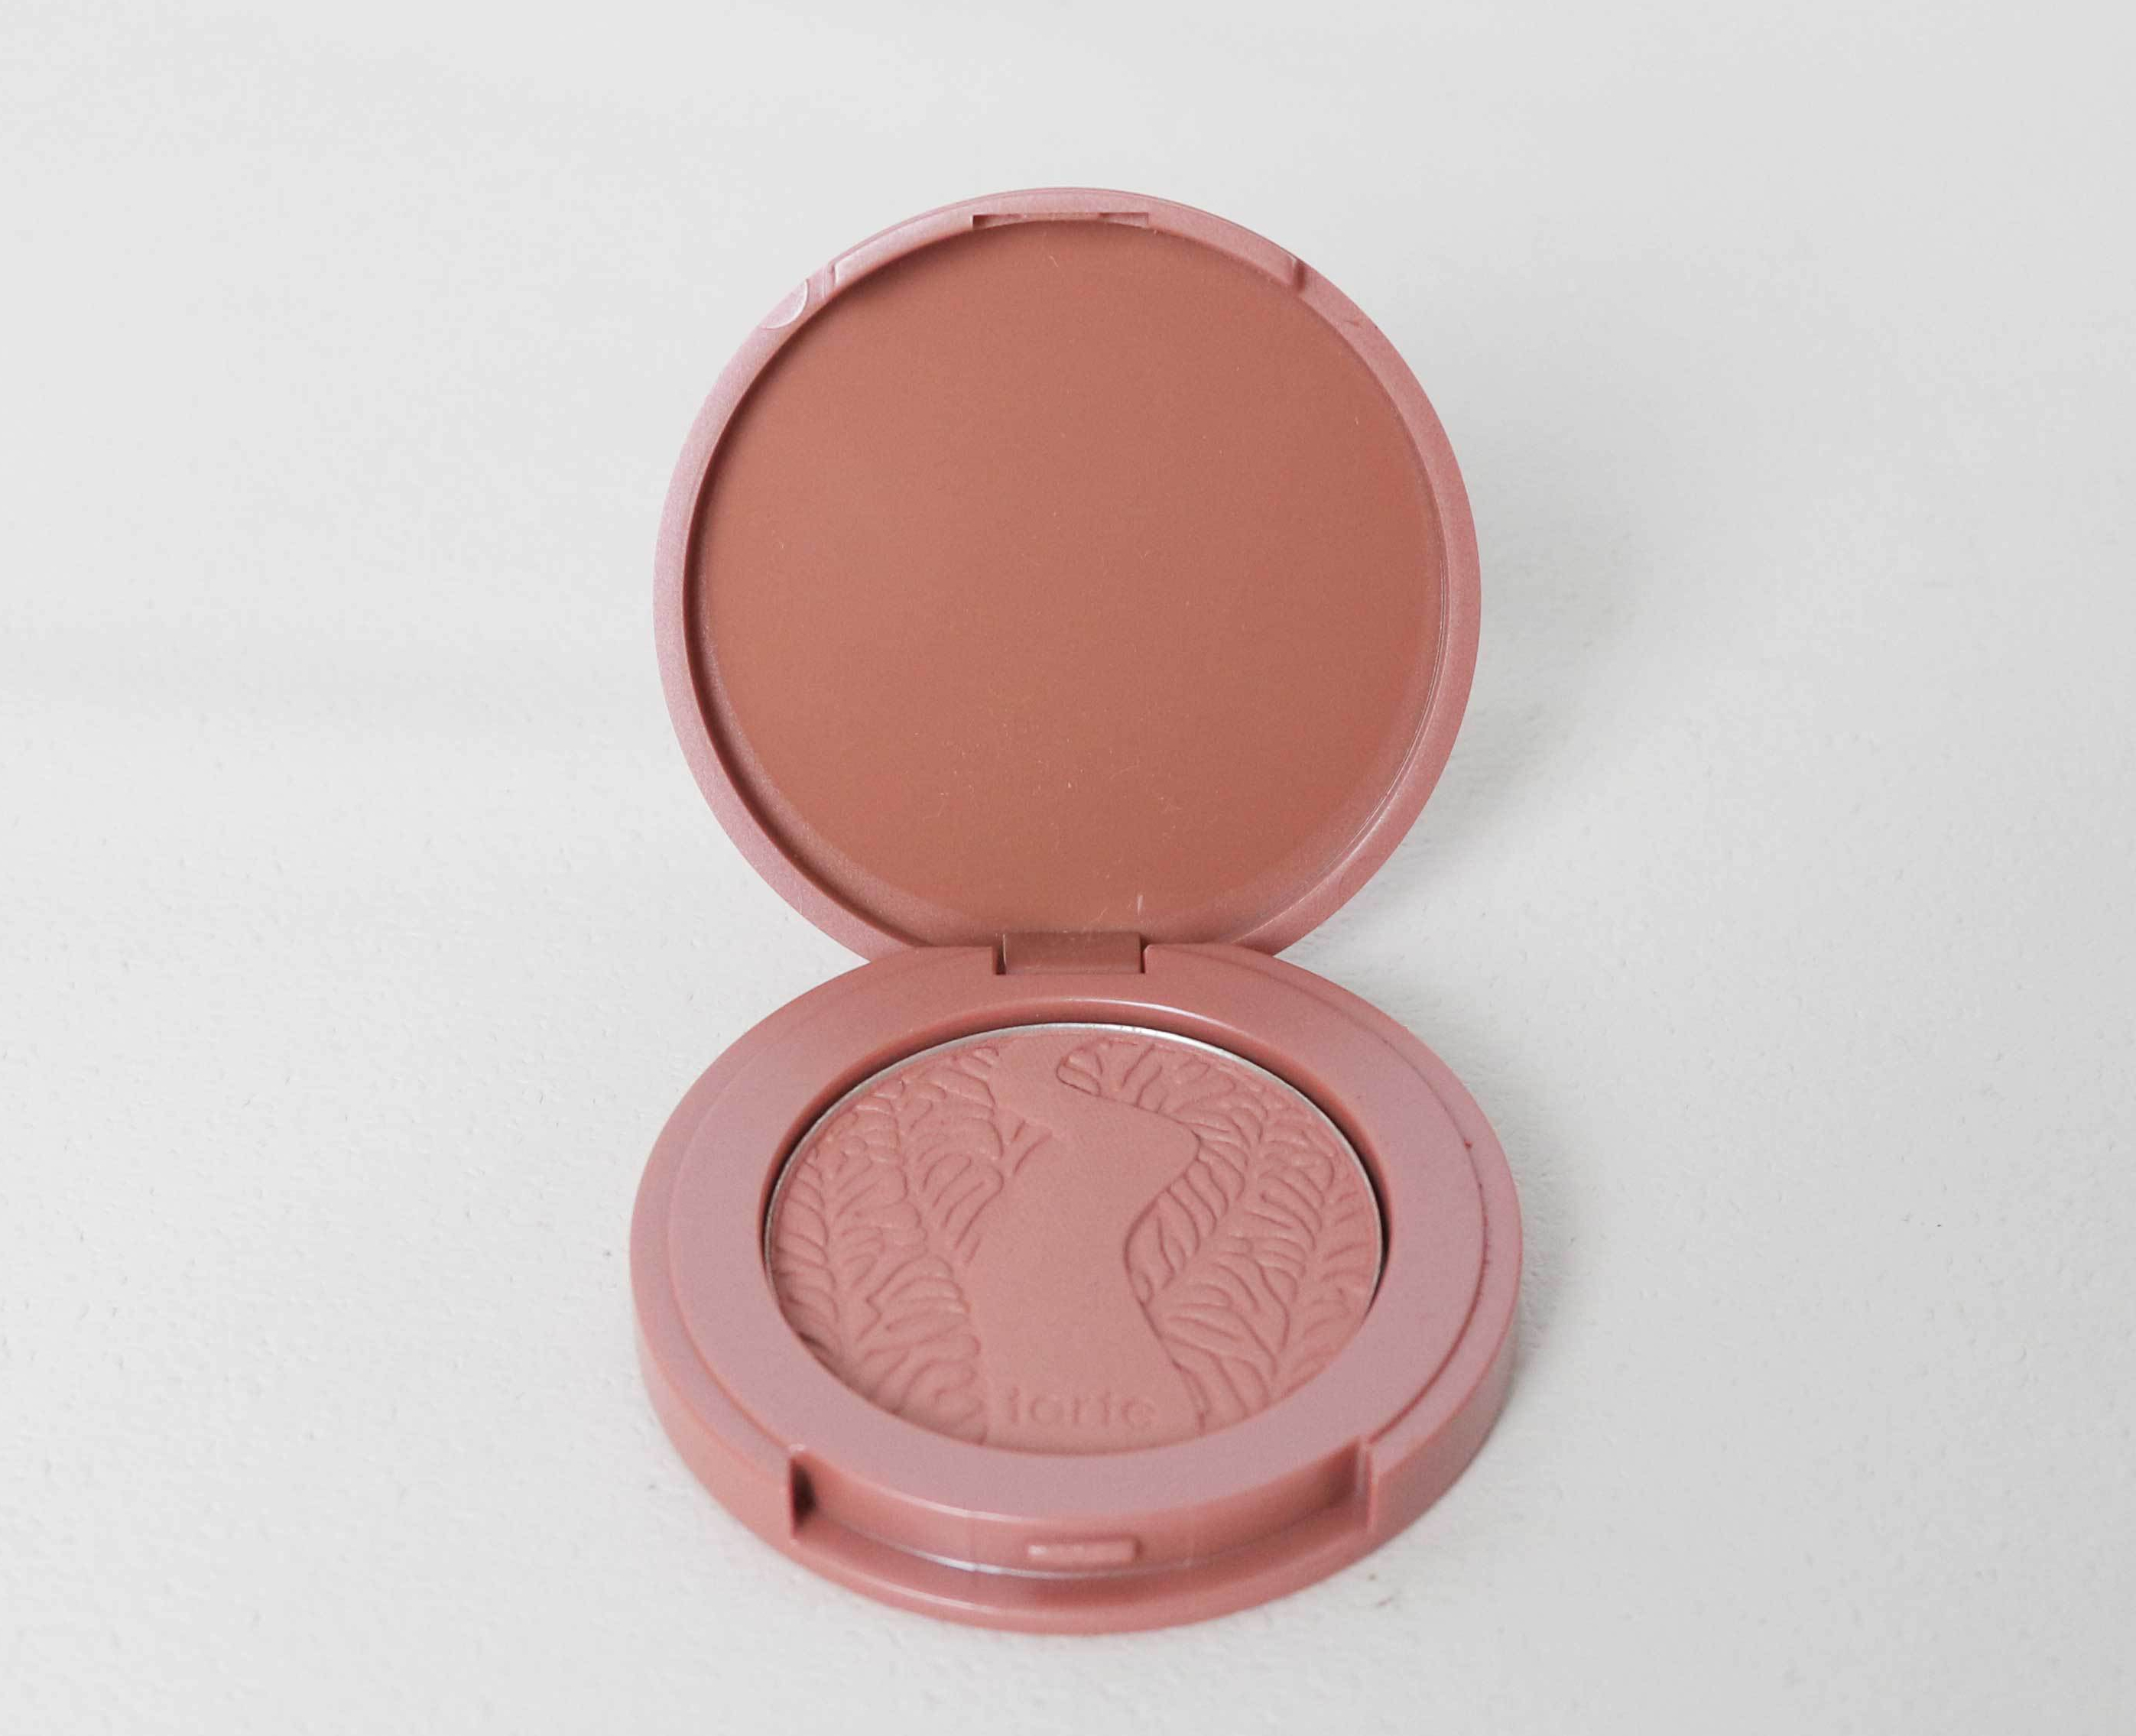 vTarte Amazonian Clay 12-Hour Blush in Paaarty